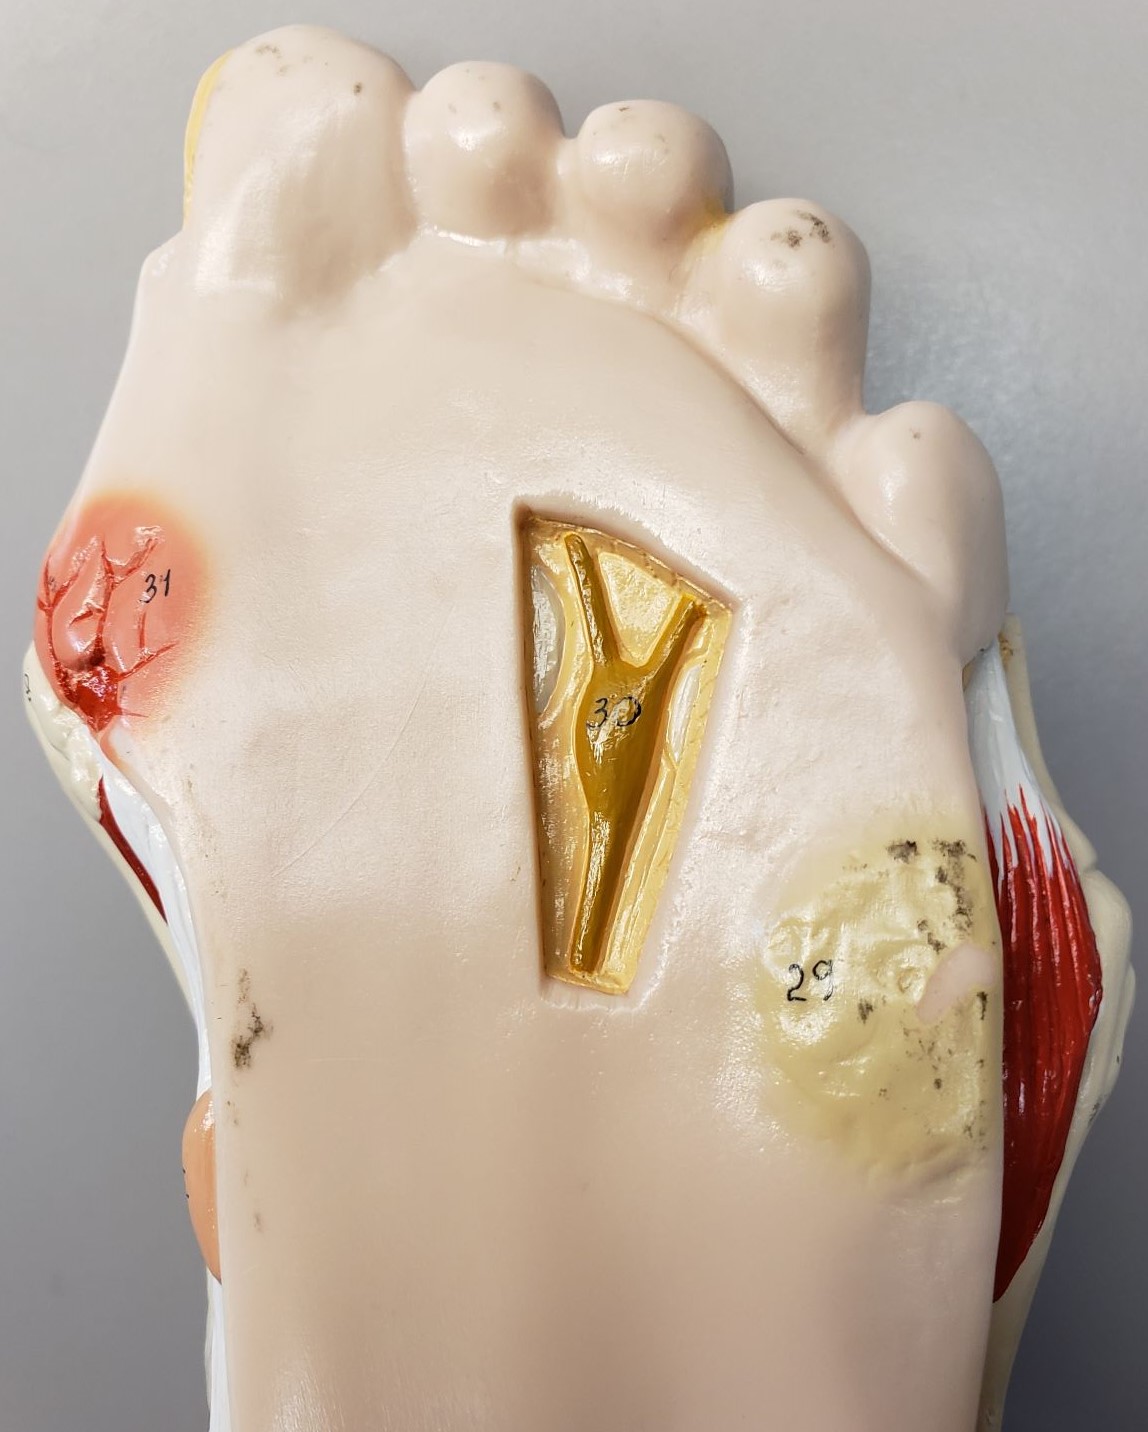 Diabetic foot model showing full-thickness ulceration on far left side of picture, and pre-ulcerative lesion on far right.